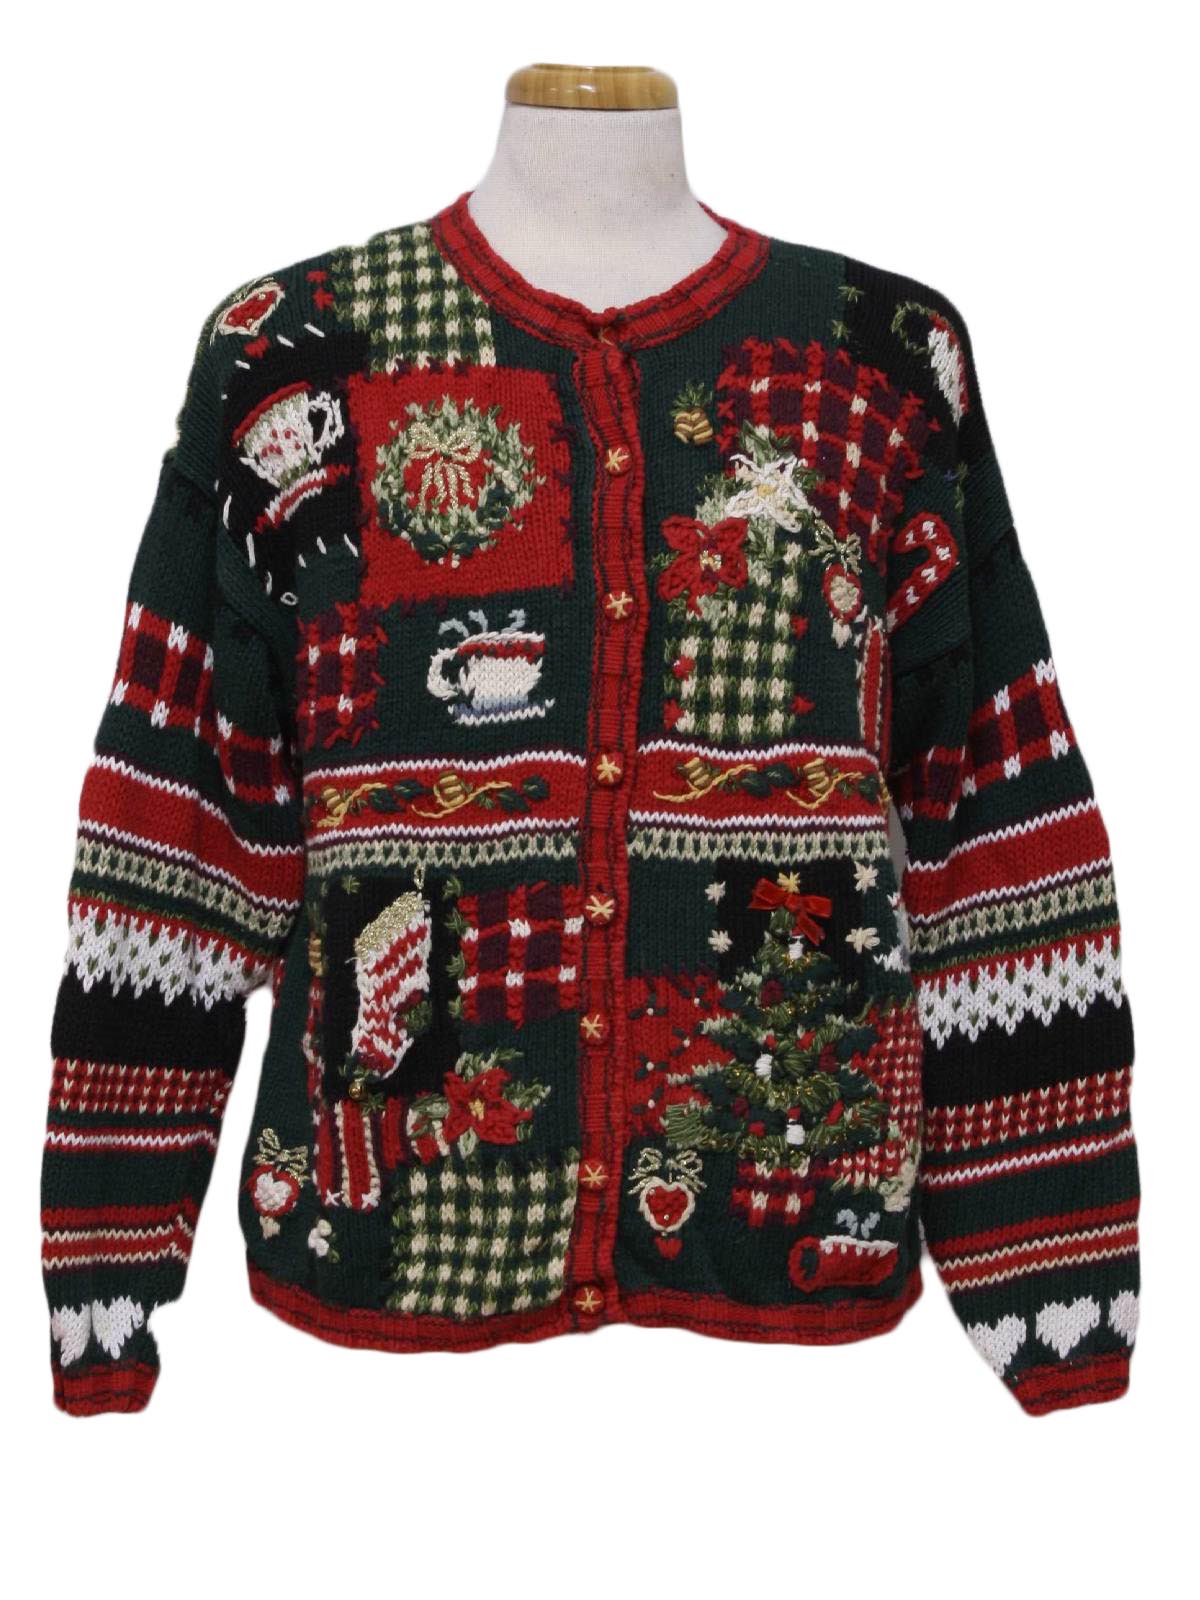 Womens Ugly Christmas Sweater: -Heirloom Collectibles- Womens green ...